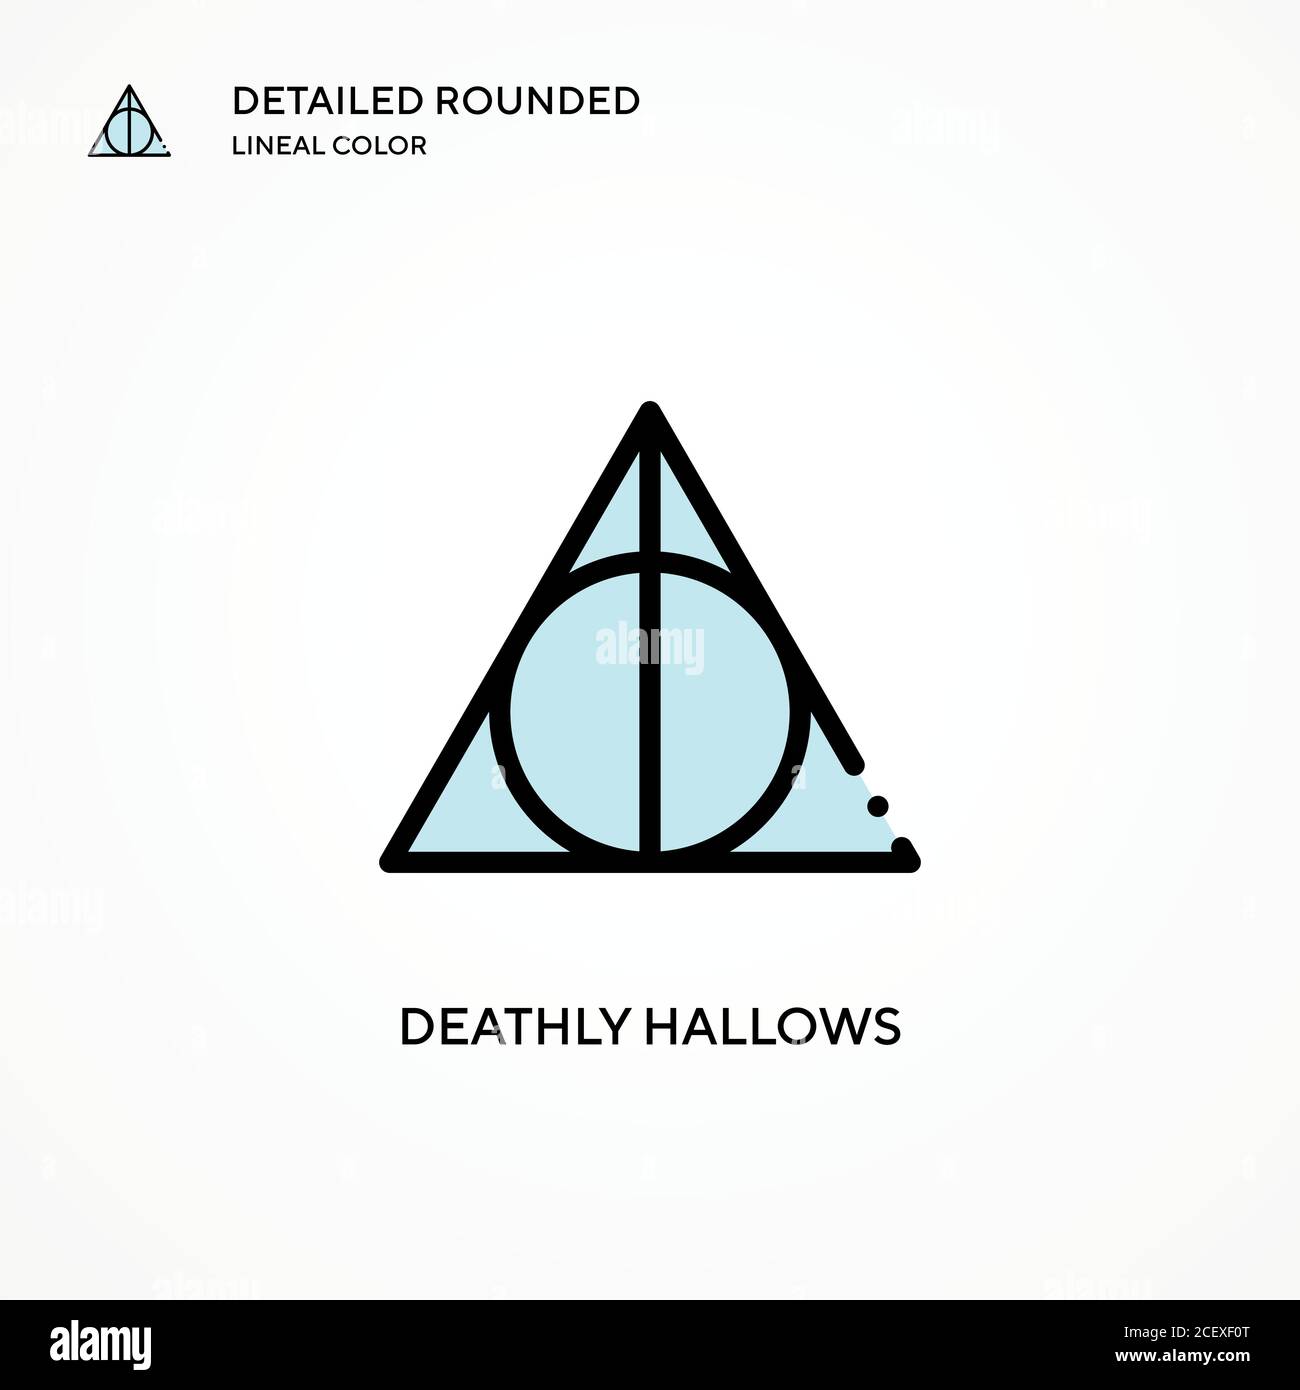 Deathly hallows vector icon. Modern vector illustration concepts. Easy to edit and customize. Stock Vector